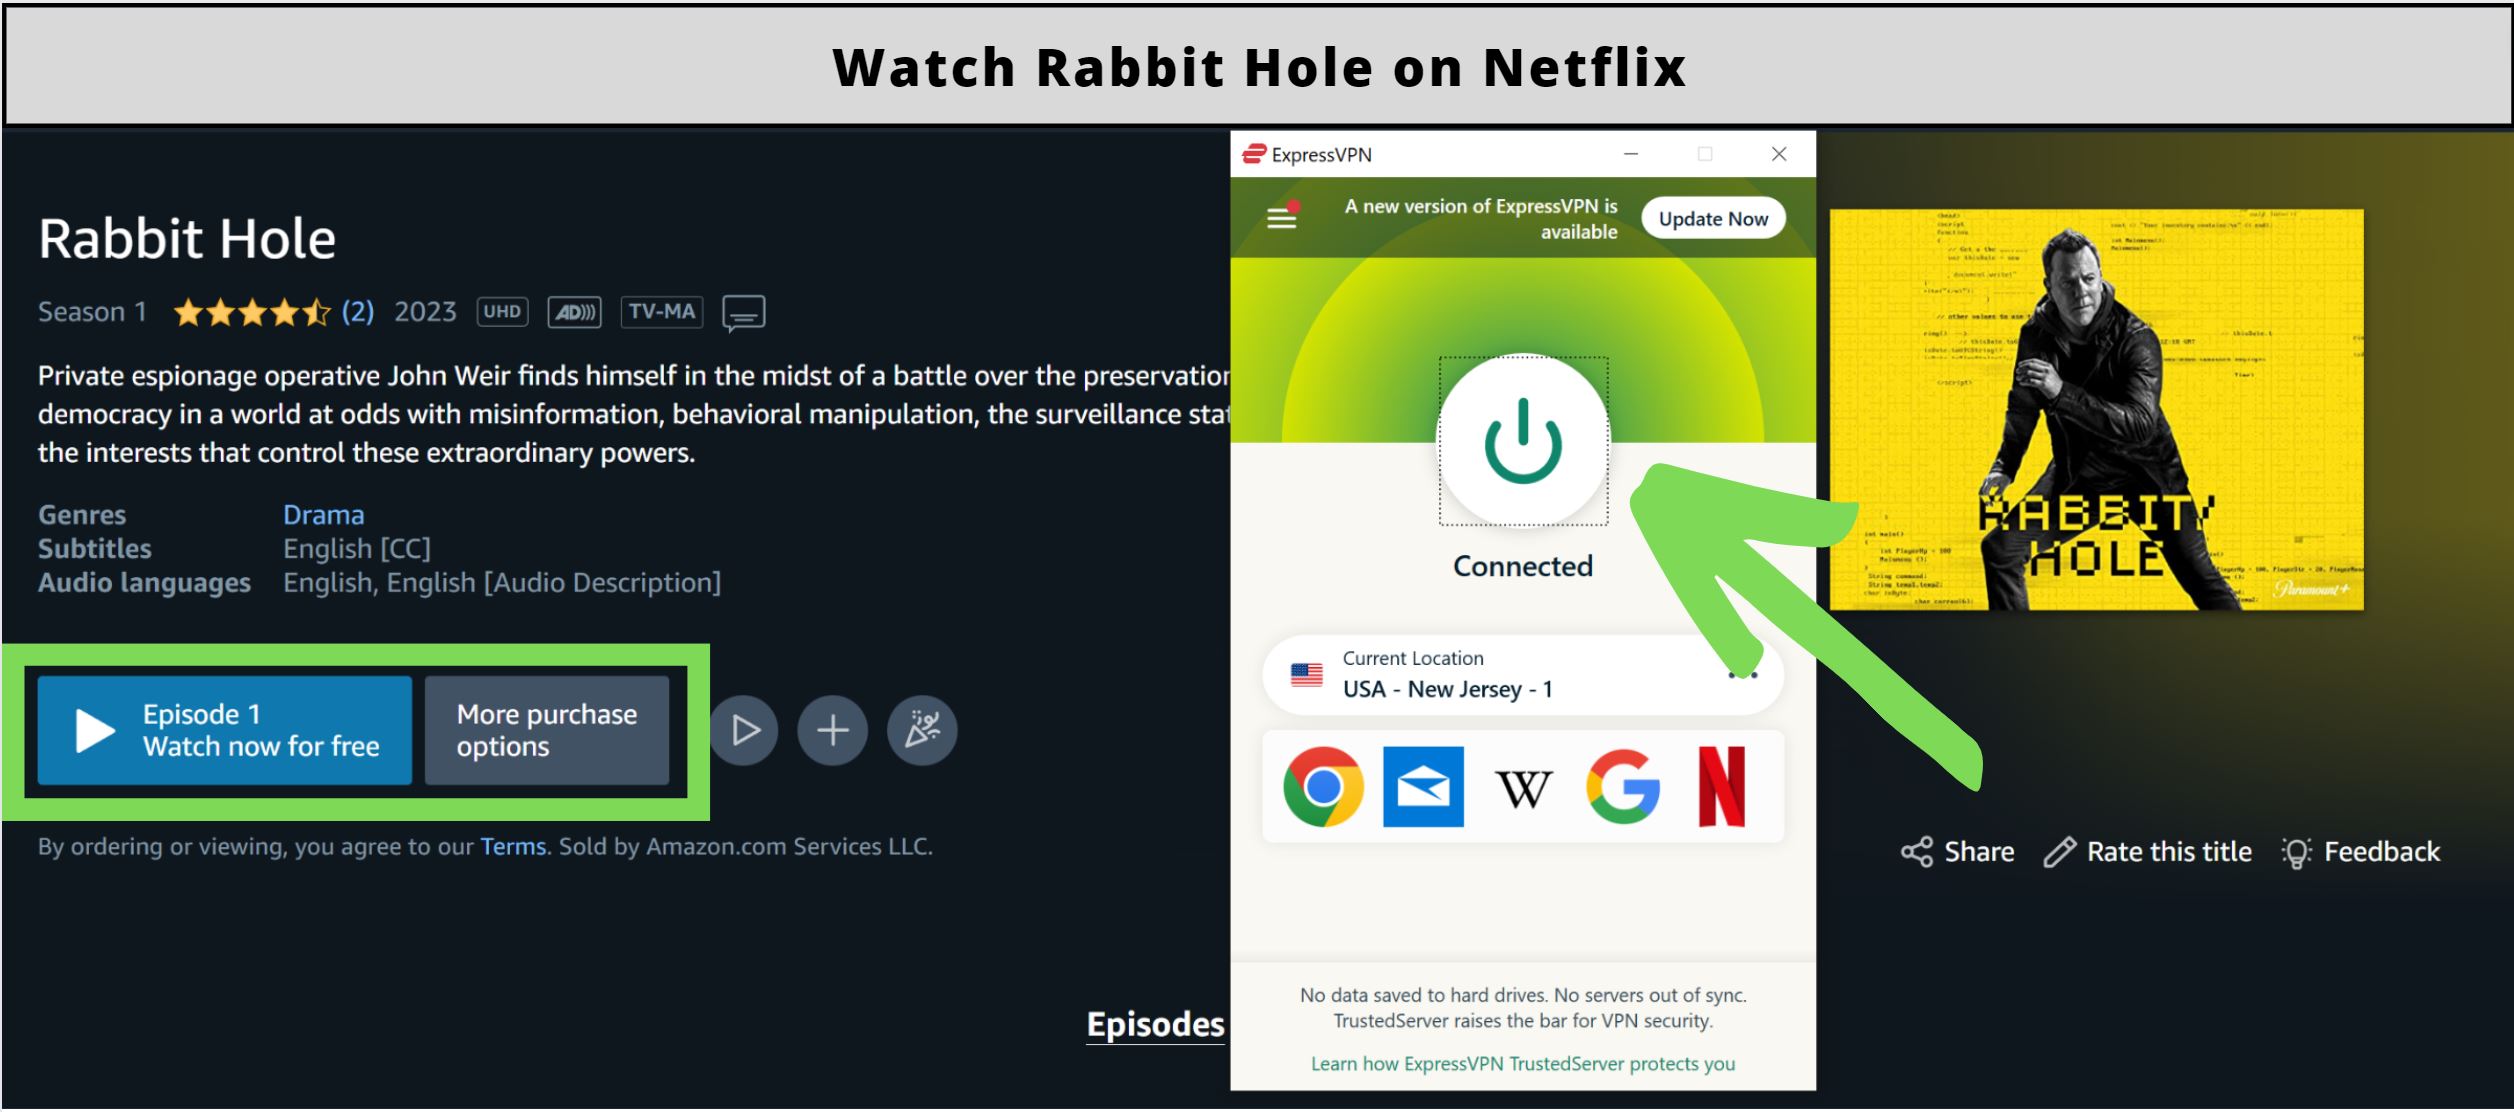 Is Rabbit Hole on Prime Video?